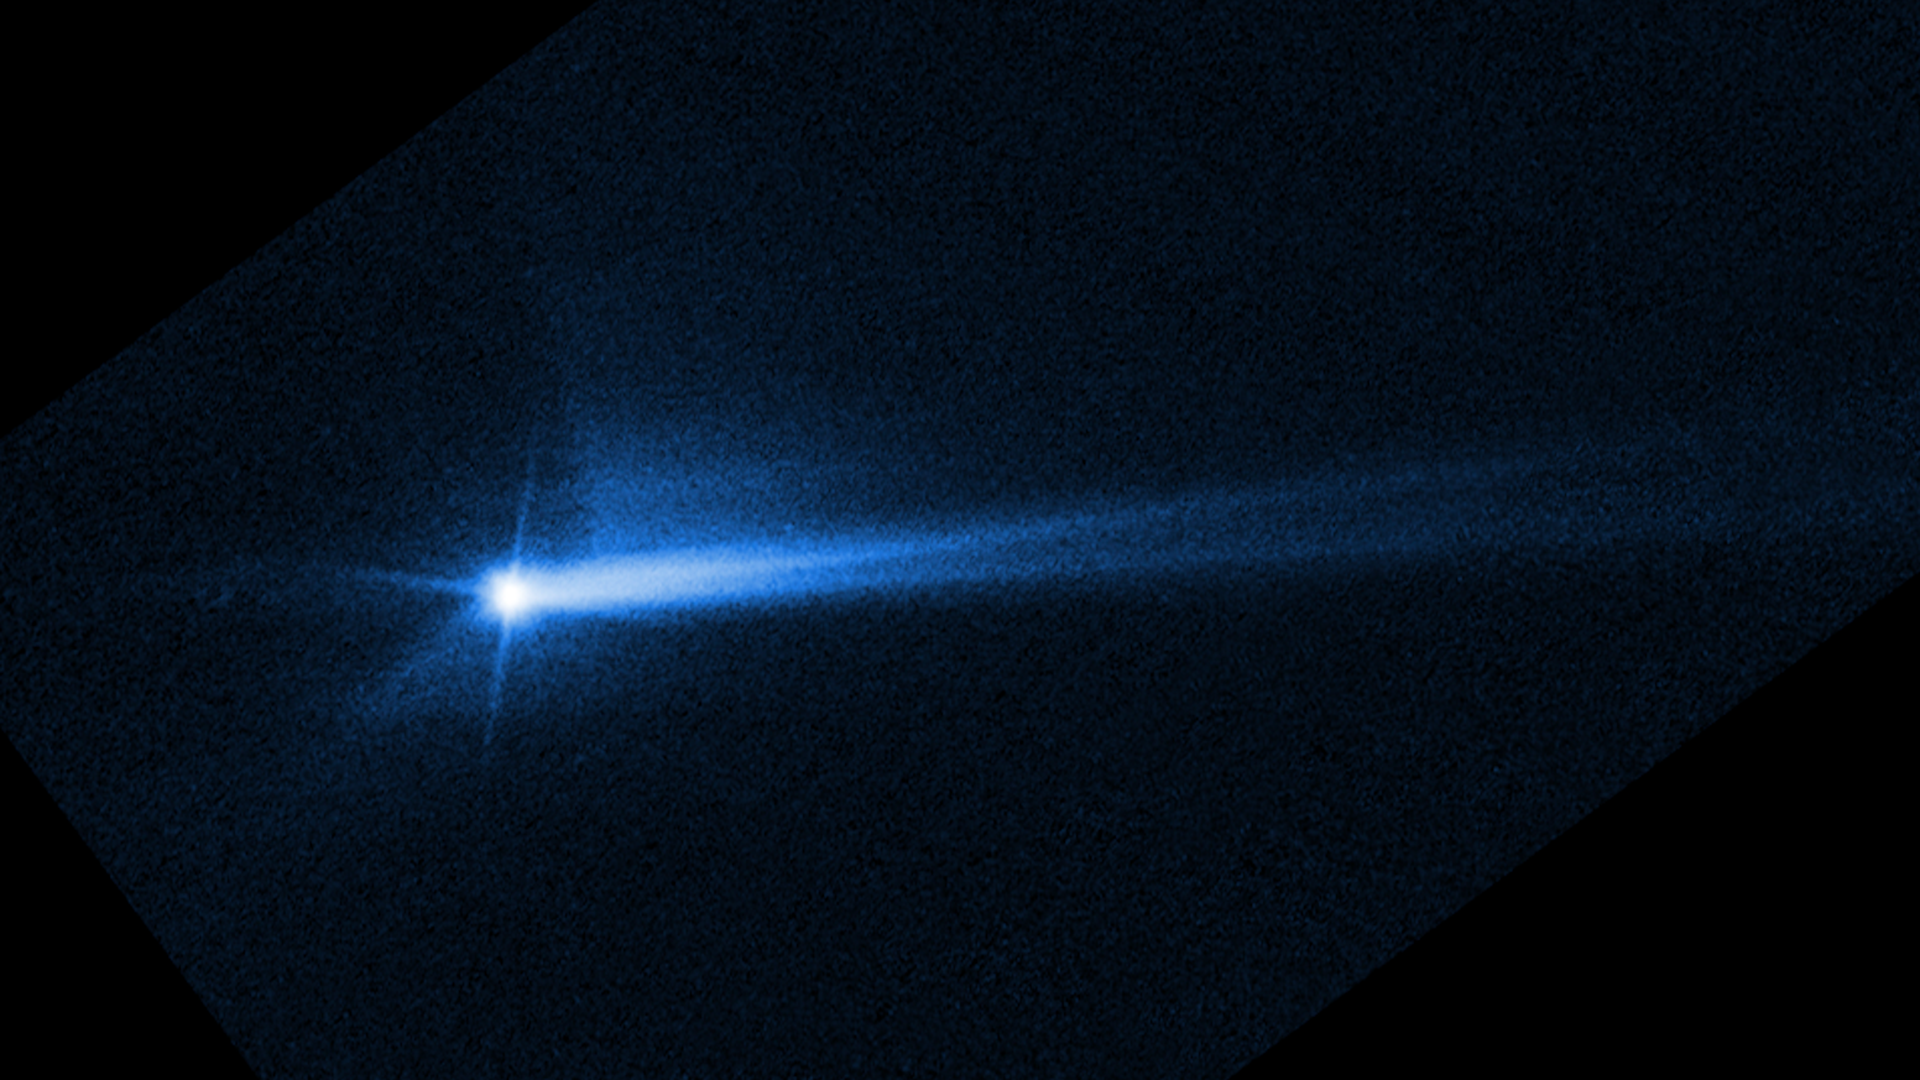 A blue streak that shows debris blasted off of an asteroid